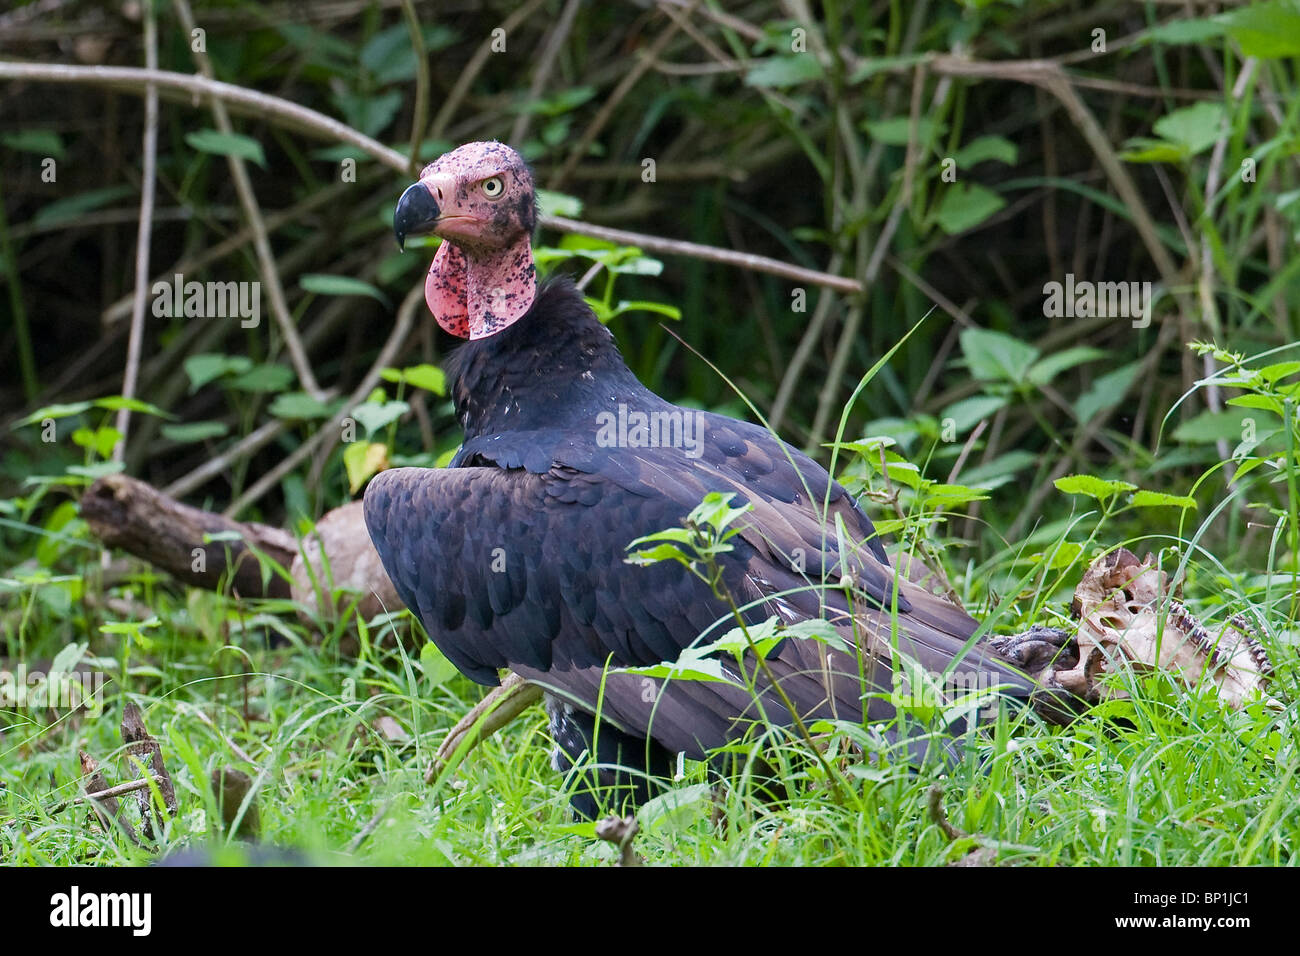 A red headed vulture (Sarcogyps calvus) alongside the remains of a spotted deer. Stock Photo